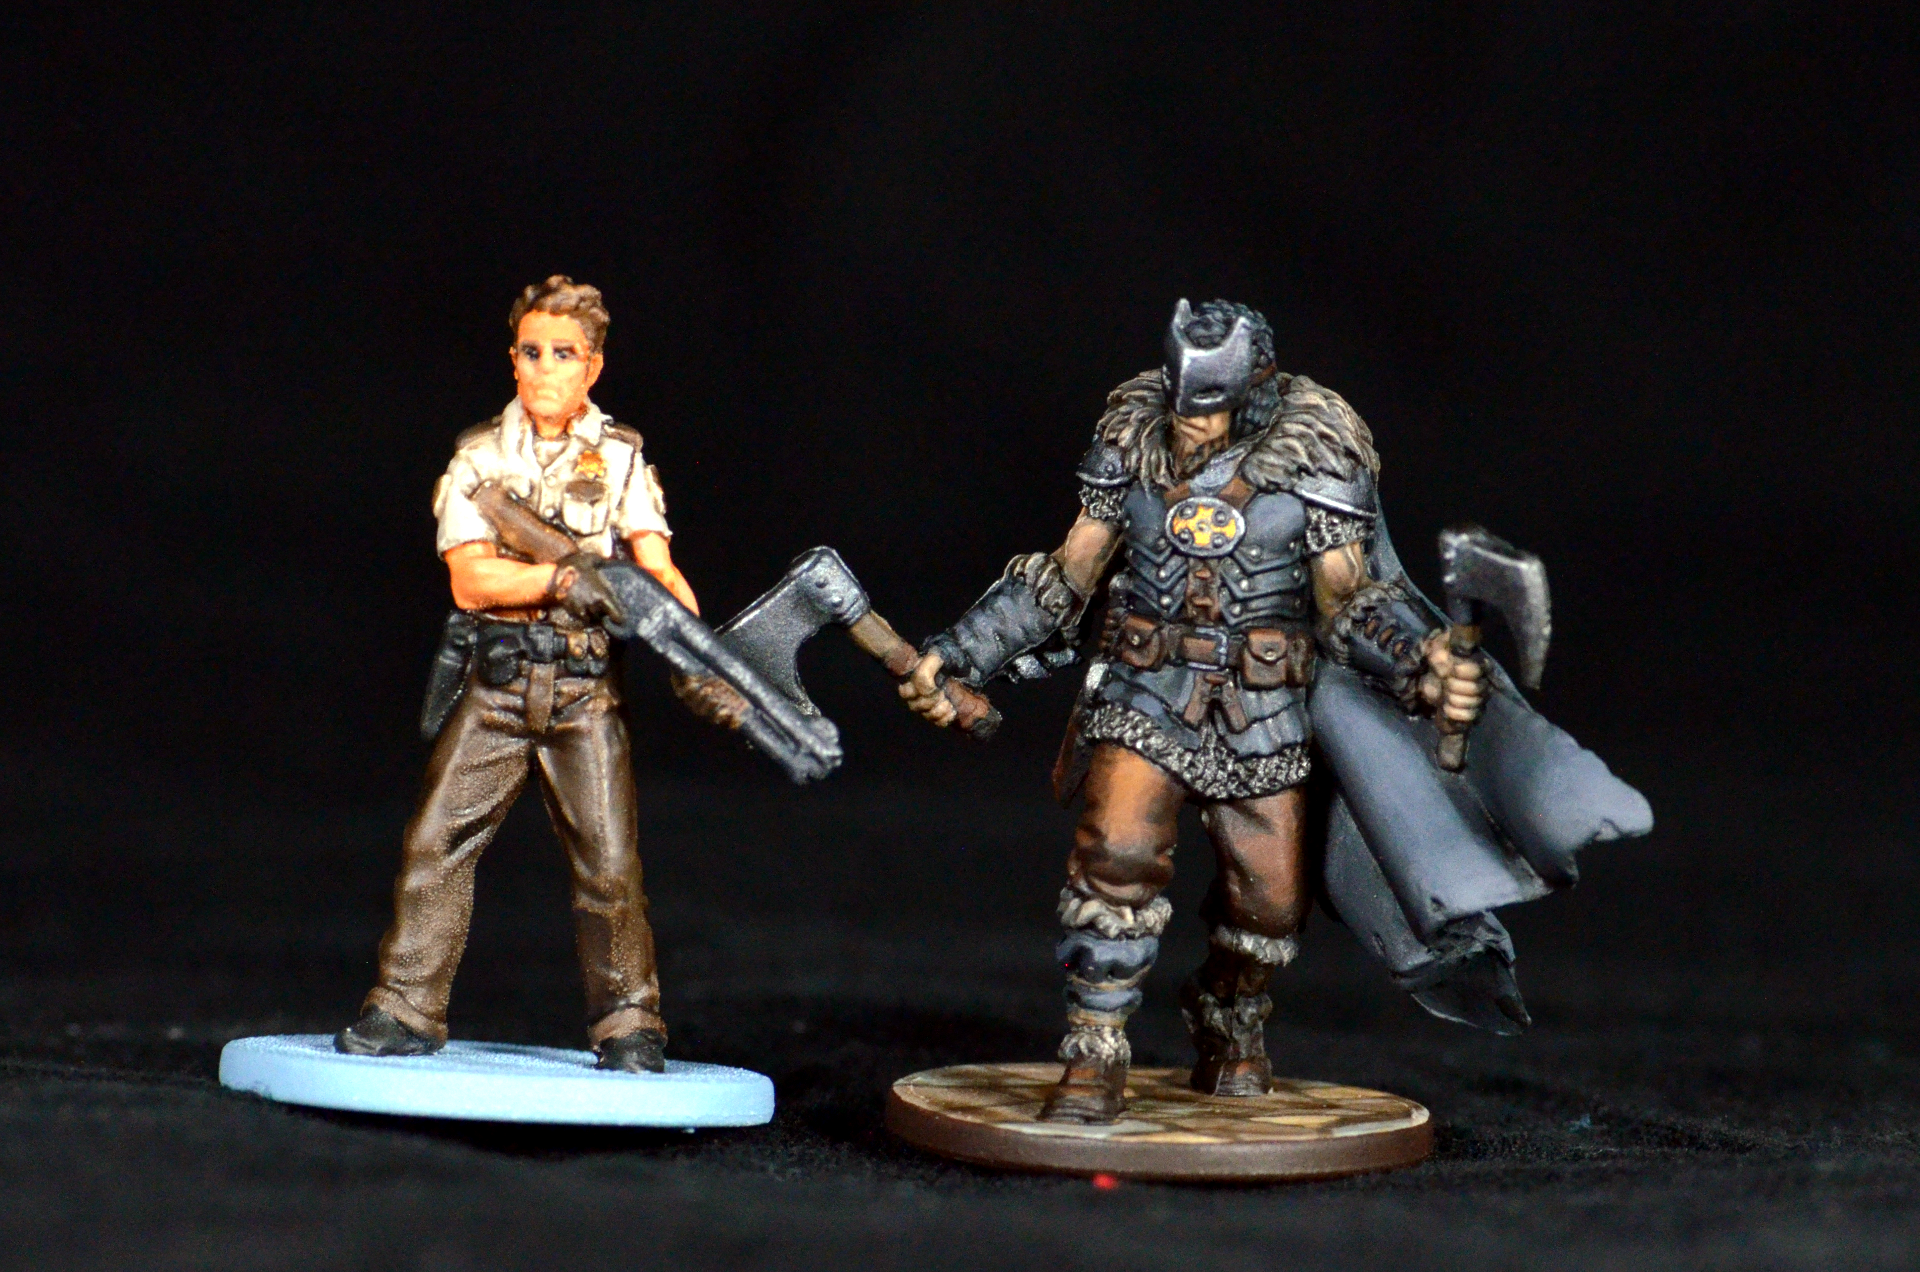 Phil from Zombicide and Scowl from Zombicide: Black Plague Kickstarter